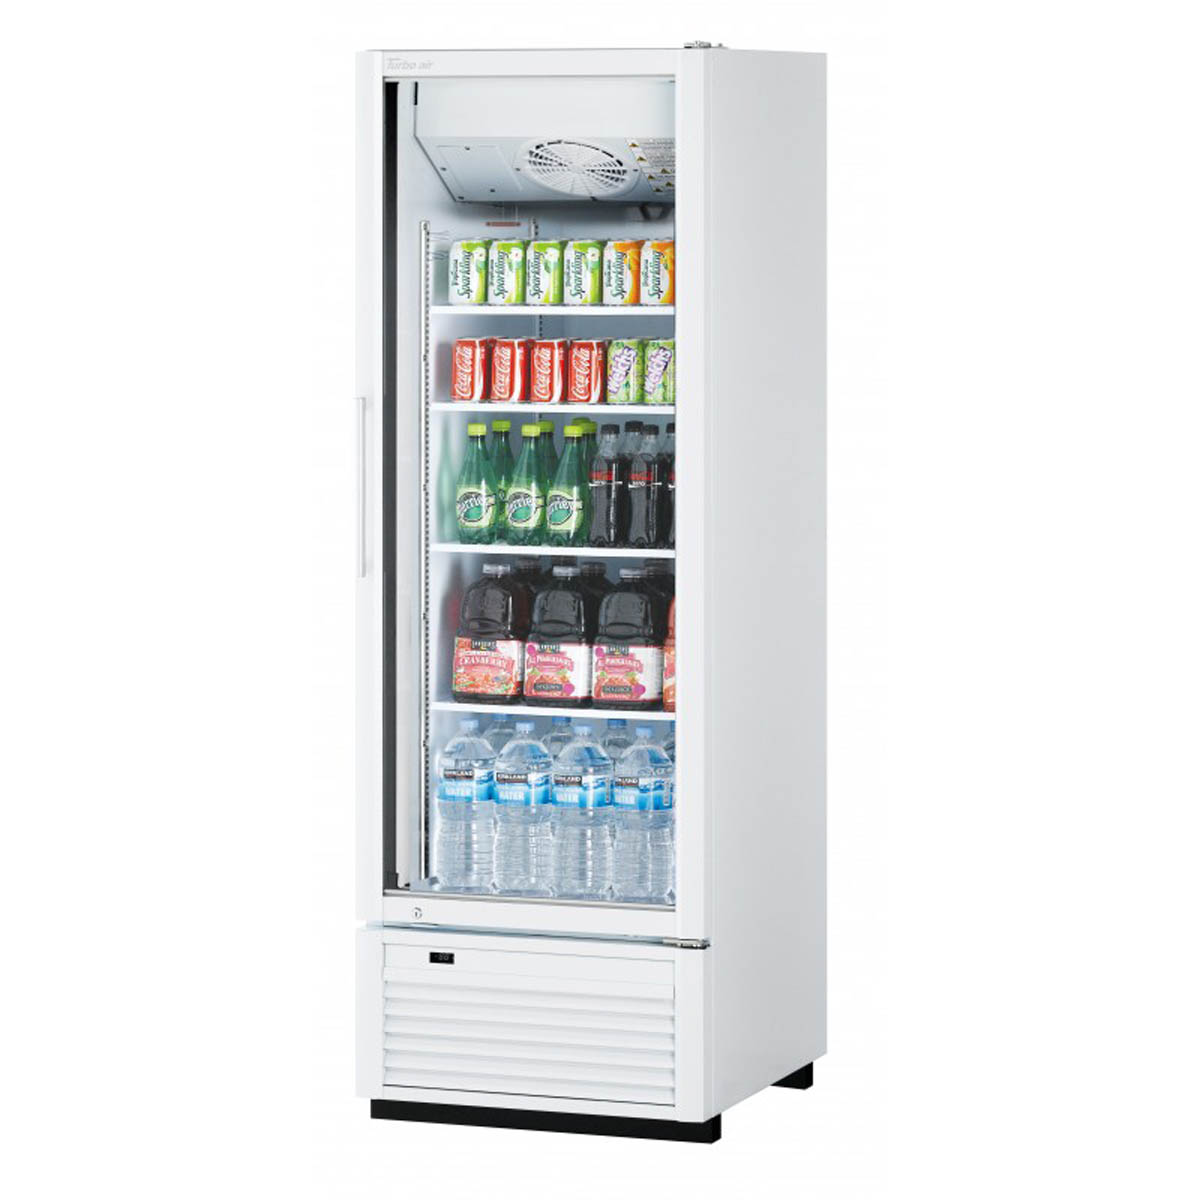 Turbo Air TGM-23SDH-N6 27″ One Section Merchandiser Refrigerator with Glass Door, 19.02 cu. ft.